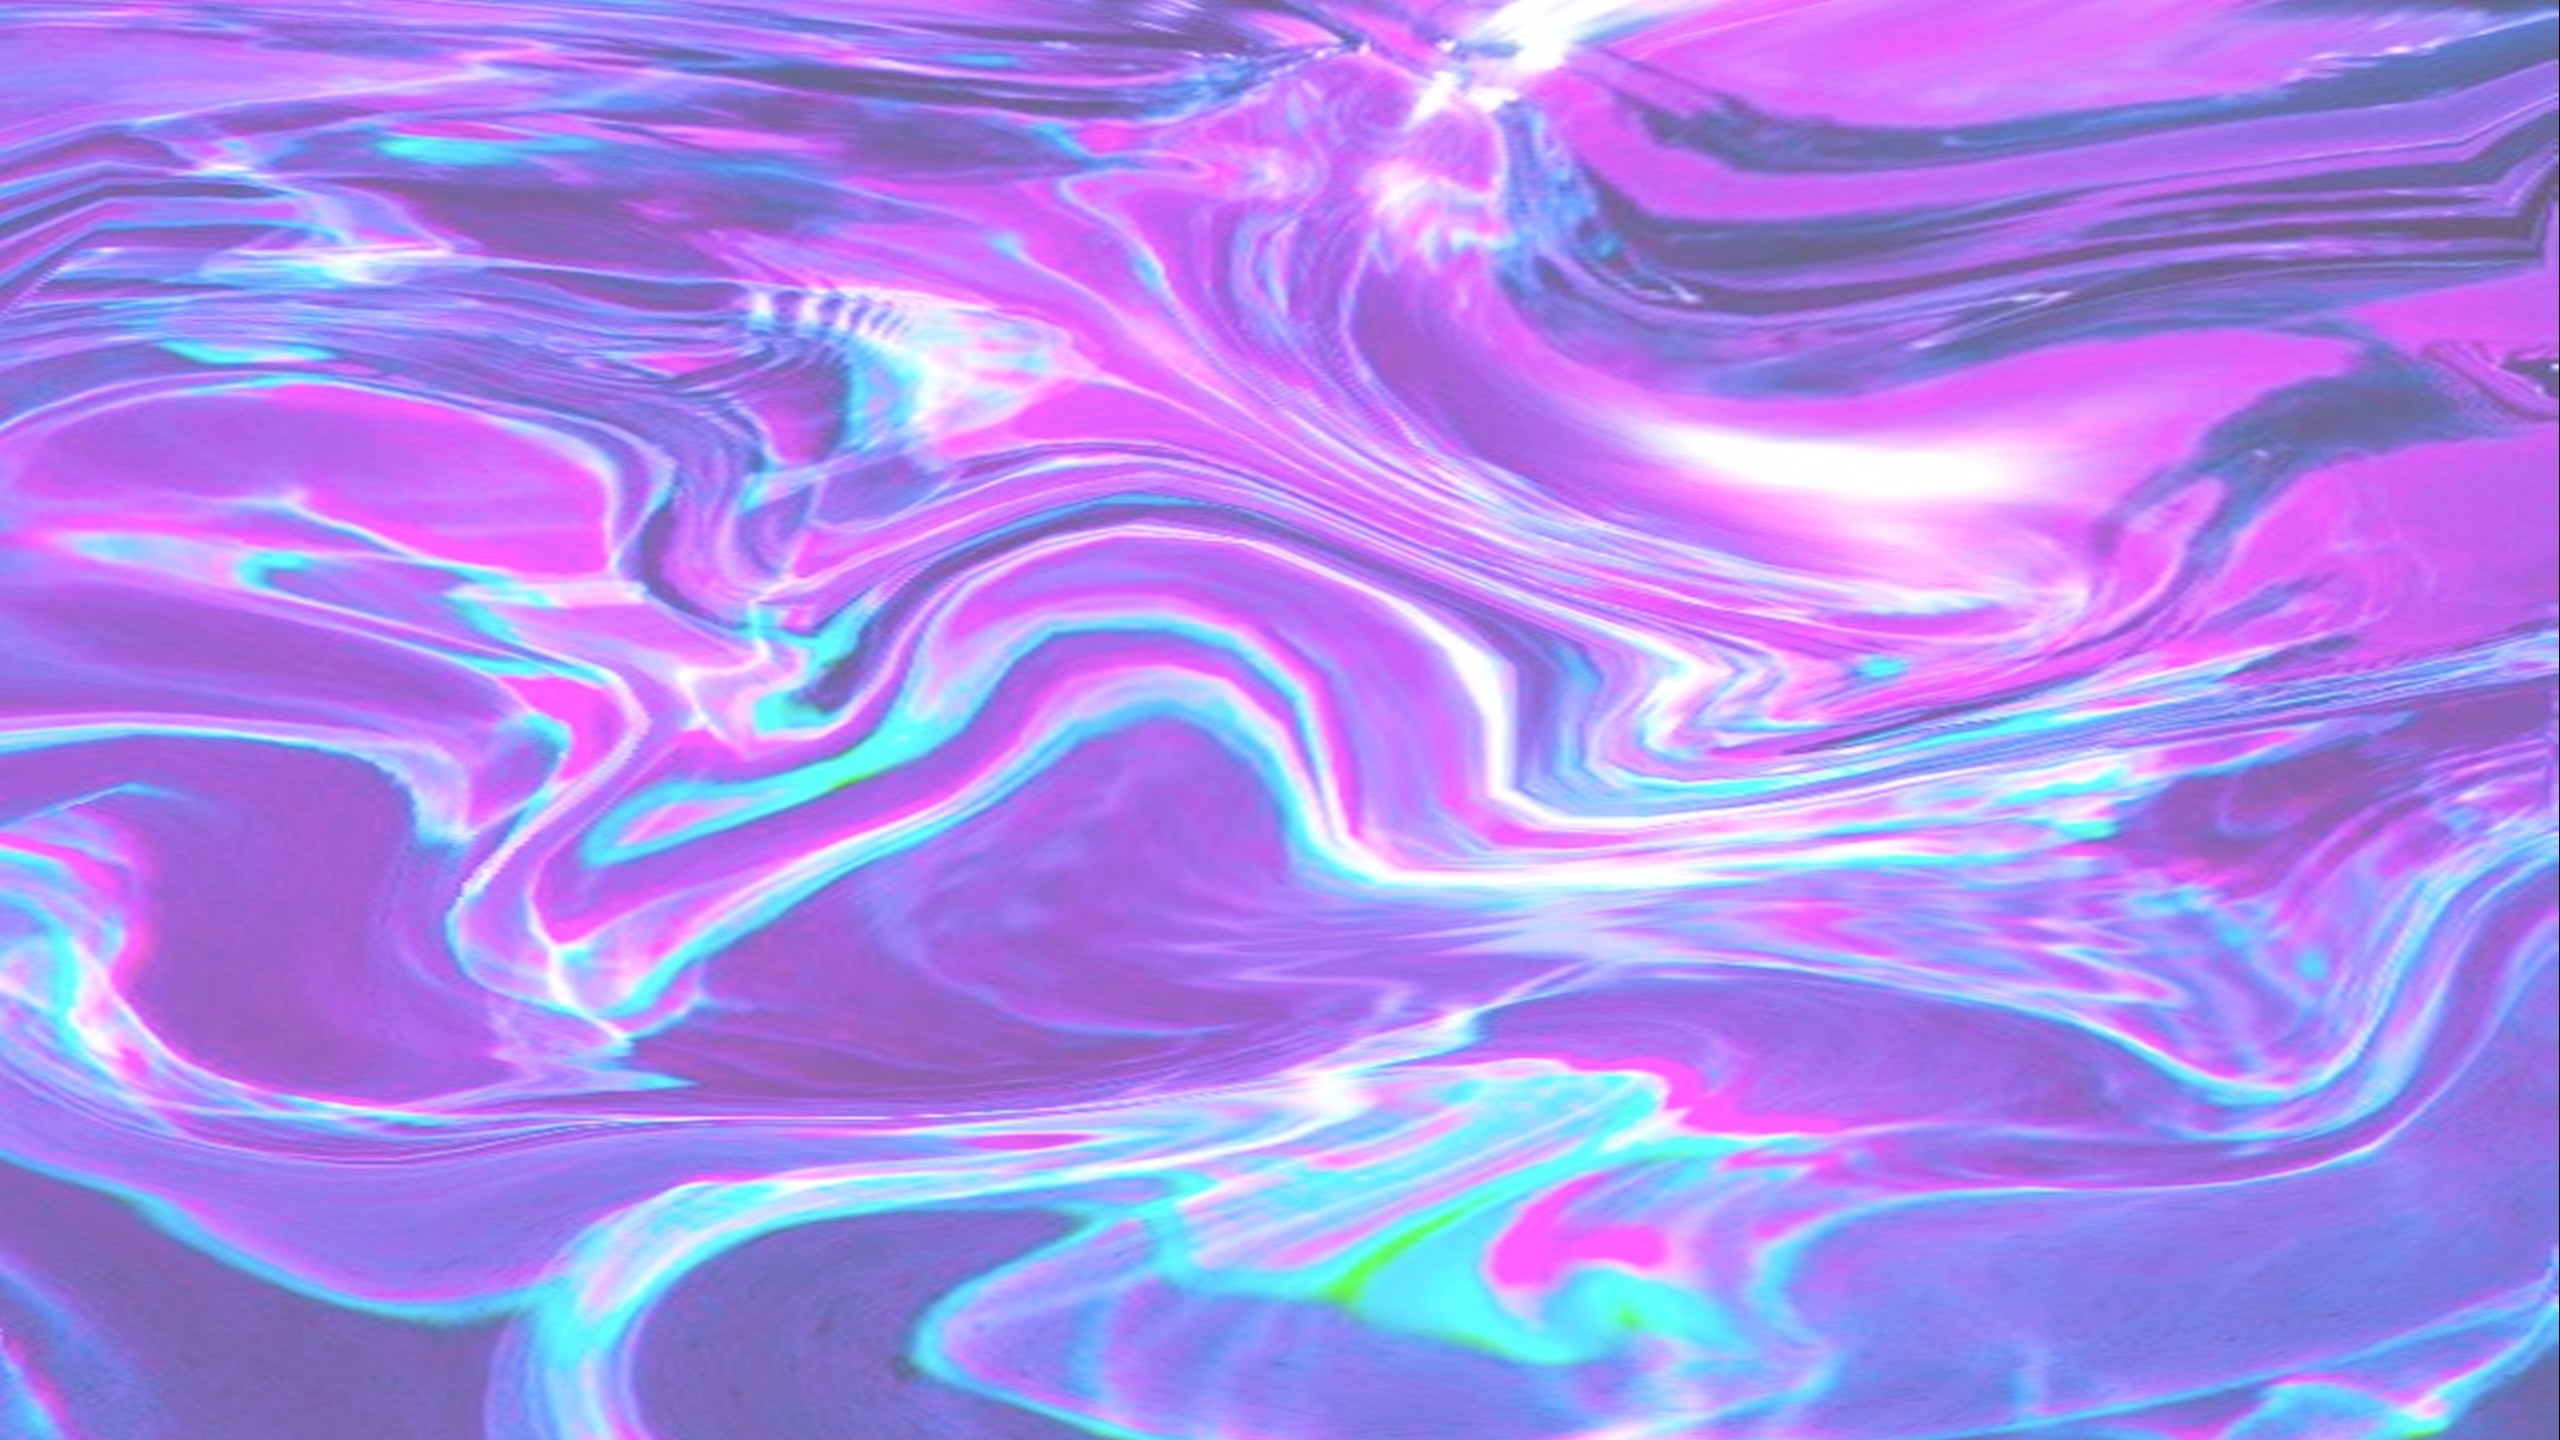 Holographic Wallpaper 54 Pictures HD Wallpapers Download Free Images Wallpaper [wallpaper981.blogspot.com]